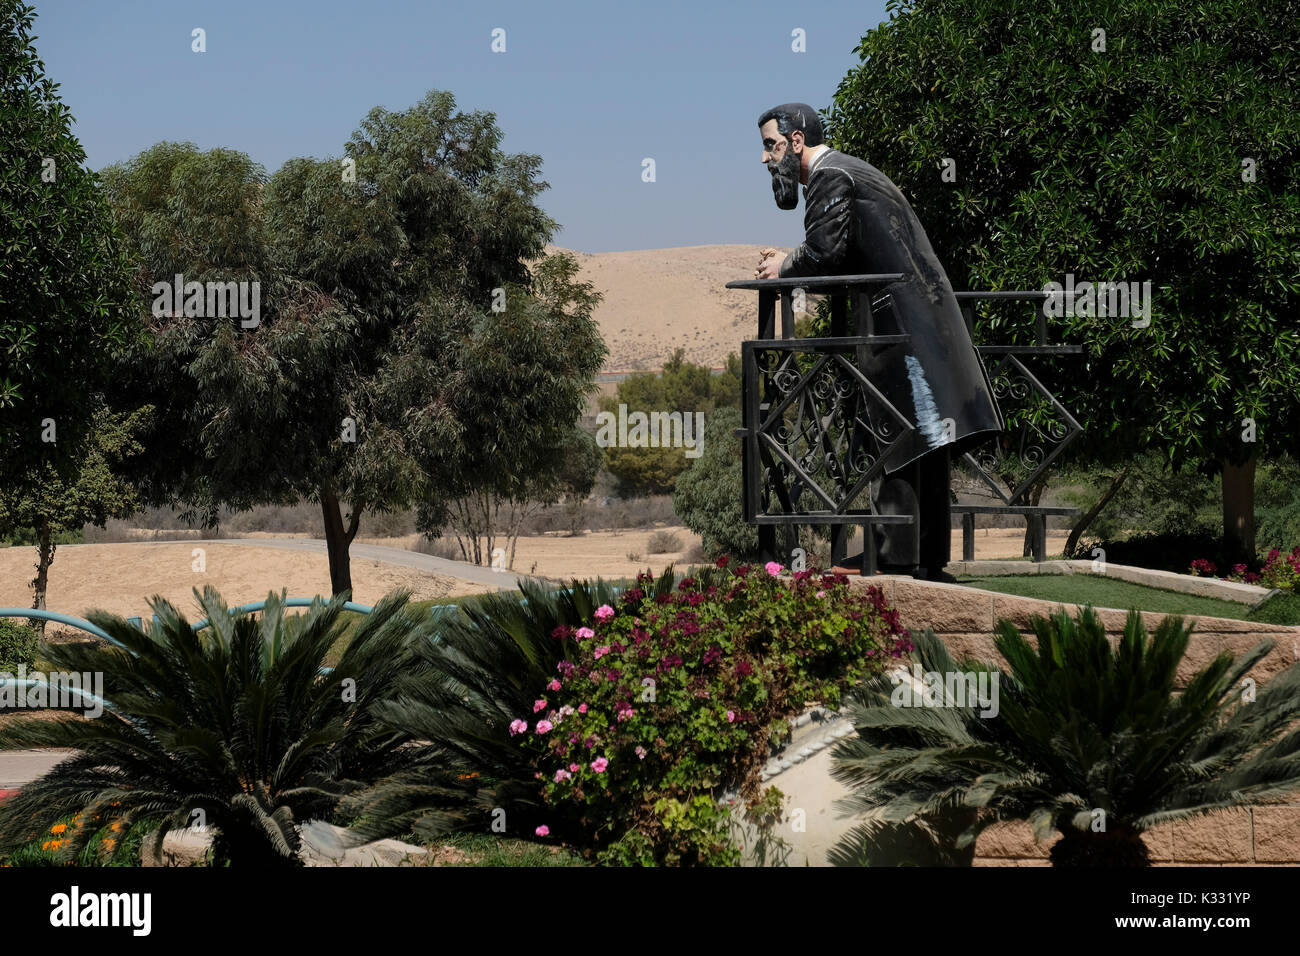 A sculpted figure depicting the founder of Zionism Theodor Herzl by Israeli artists Israel Benita ( 2012 ) placed at a roundabout in Herzl or Hertzel street the city of Dimona in the Negev desert southern Israel Stock Photo